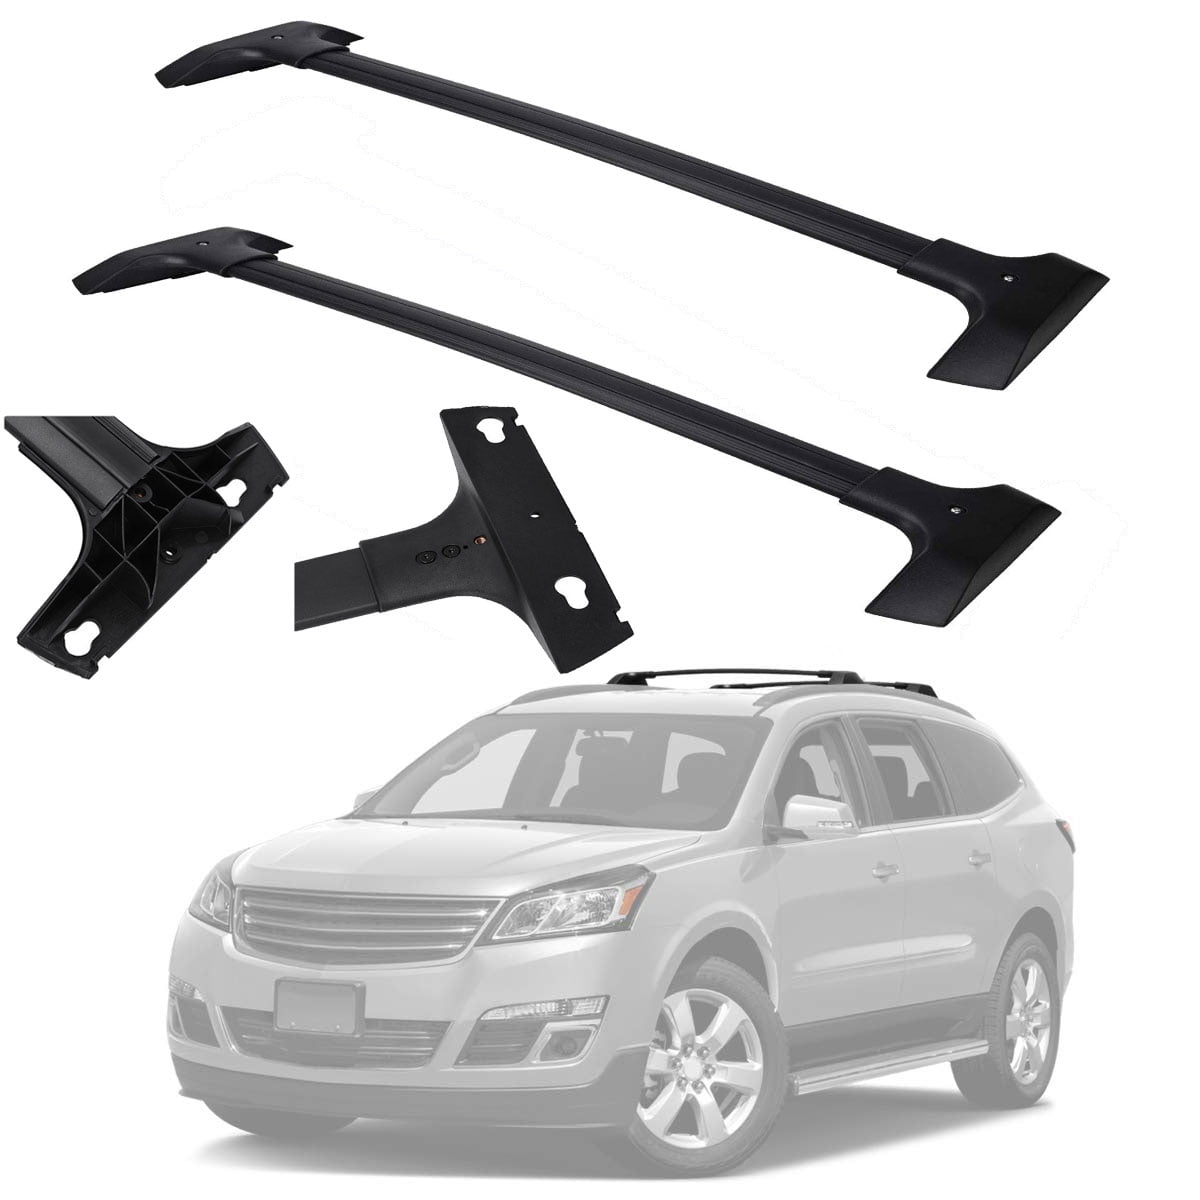 Roof Rack Cross Bar for 2009-2017 Chevy Chevrolet Traverse Aluminium Luggage Cargo Carrier Rails 2011 Chevy Traverse Roof Rack C Channel